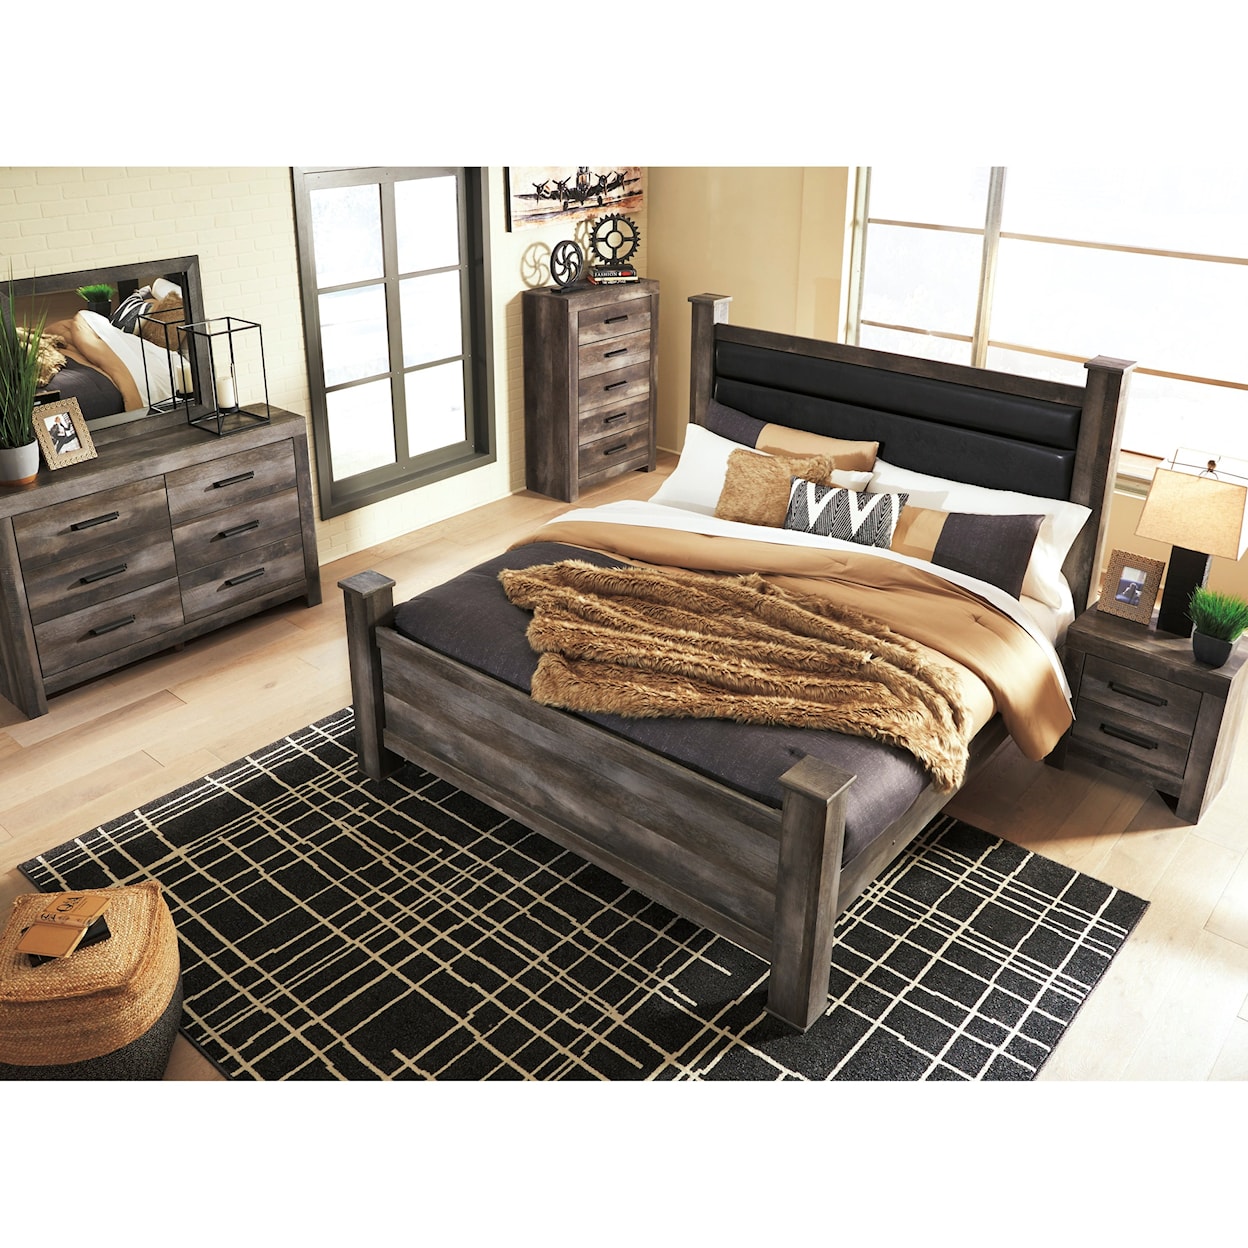 Signature Wilde King Poster Bed